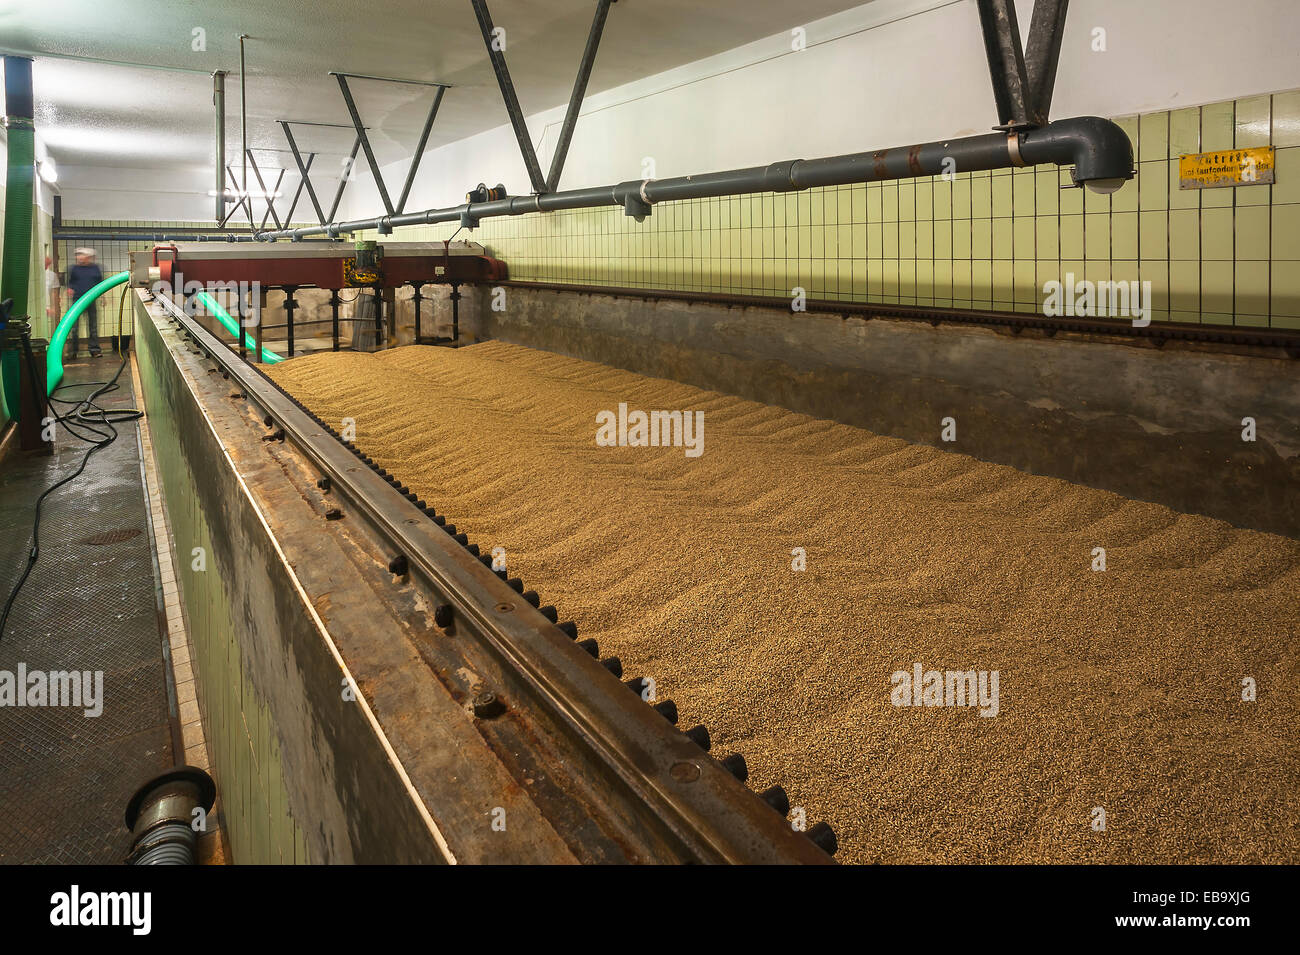 Malting box in a malthouse, Bavaria, Germany Stock Photo